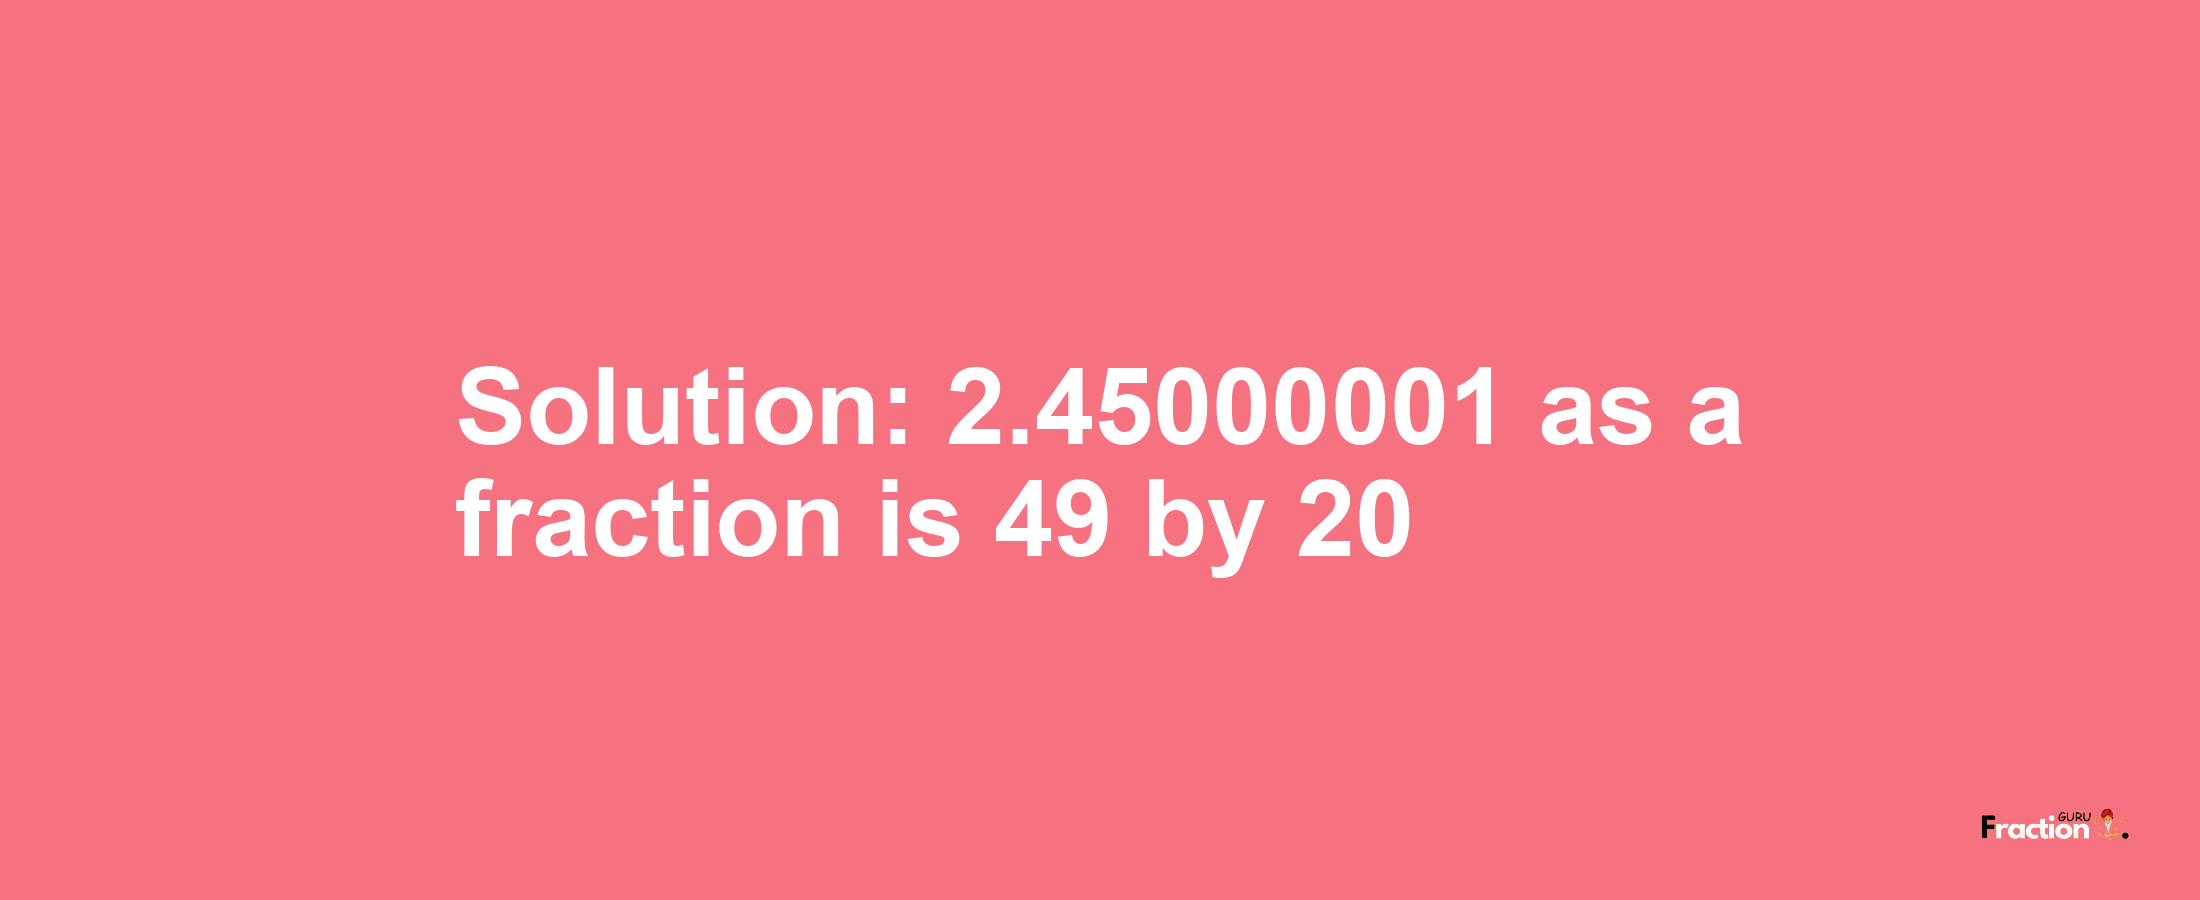 Solution:2.45000001 as a fraction is 49/20